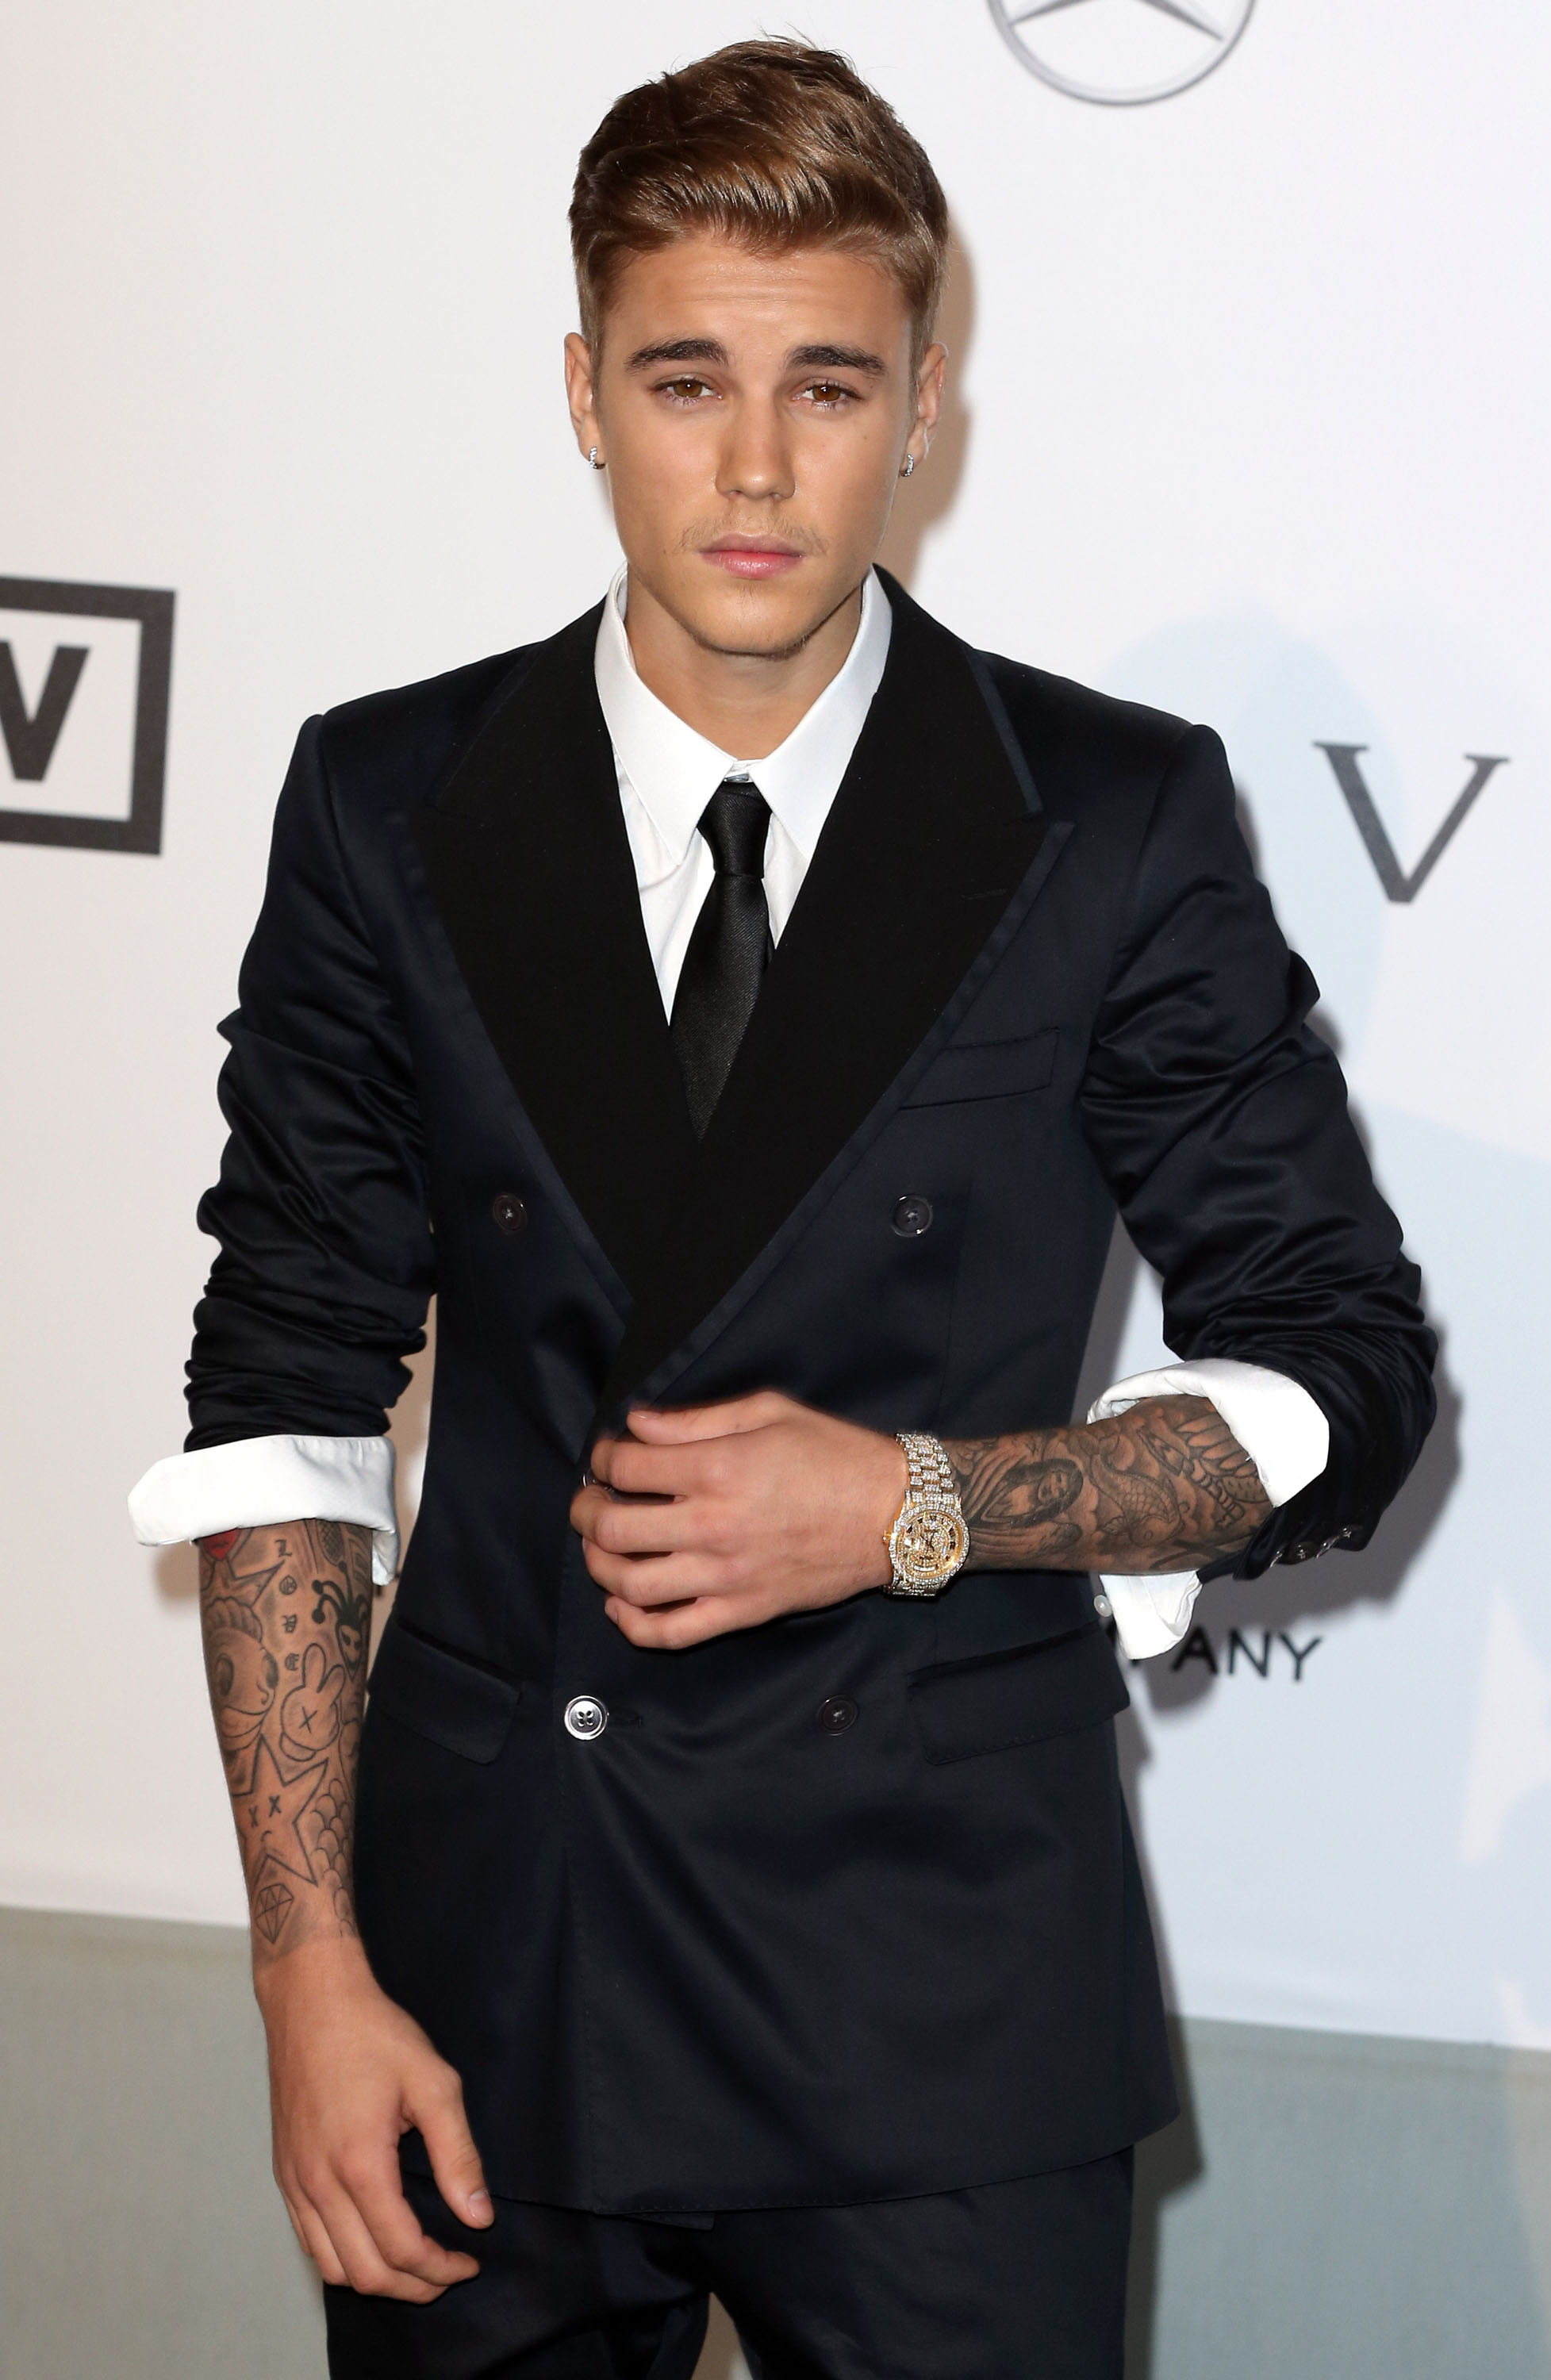 Picture of Justin Bieber in General Pictures - justin-bieber-1400955208 ...